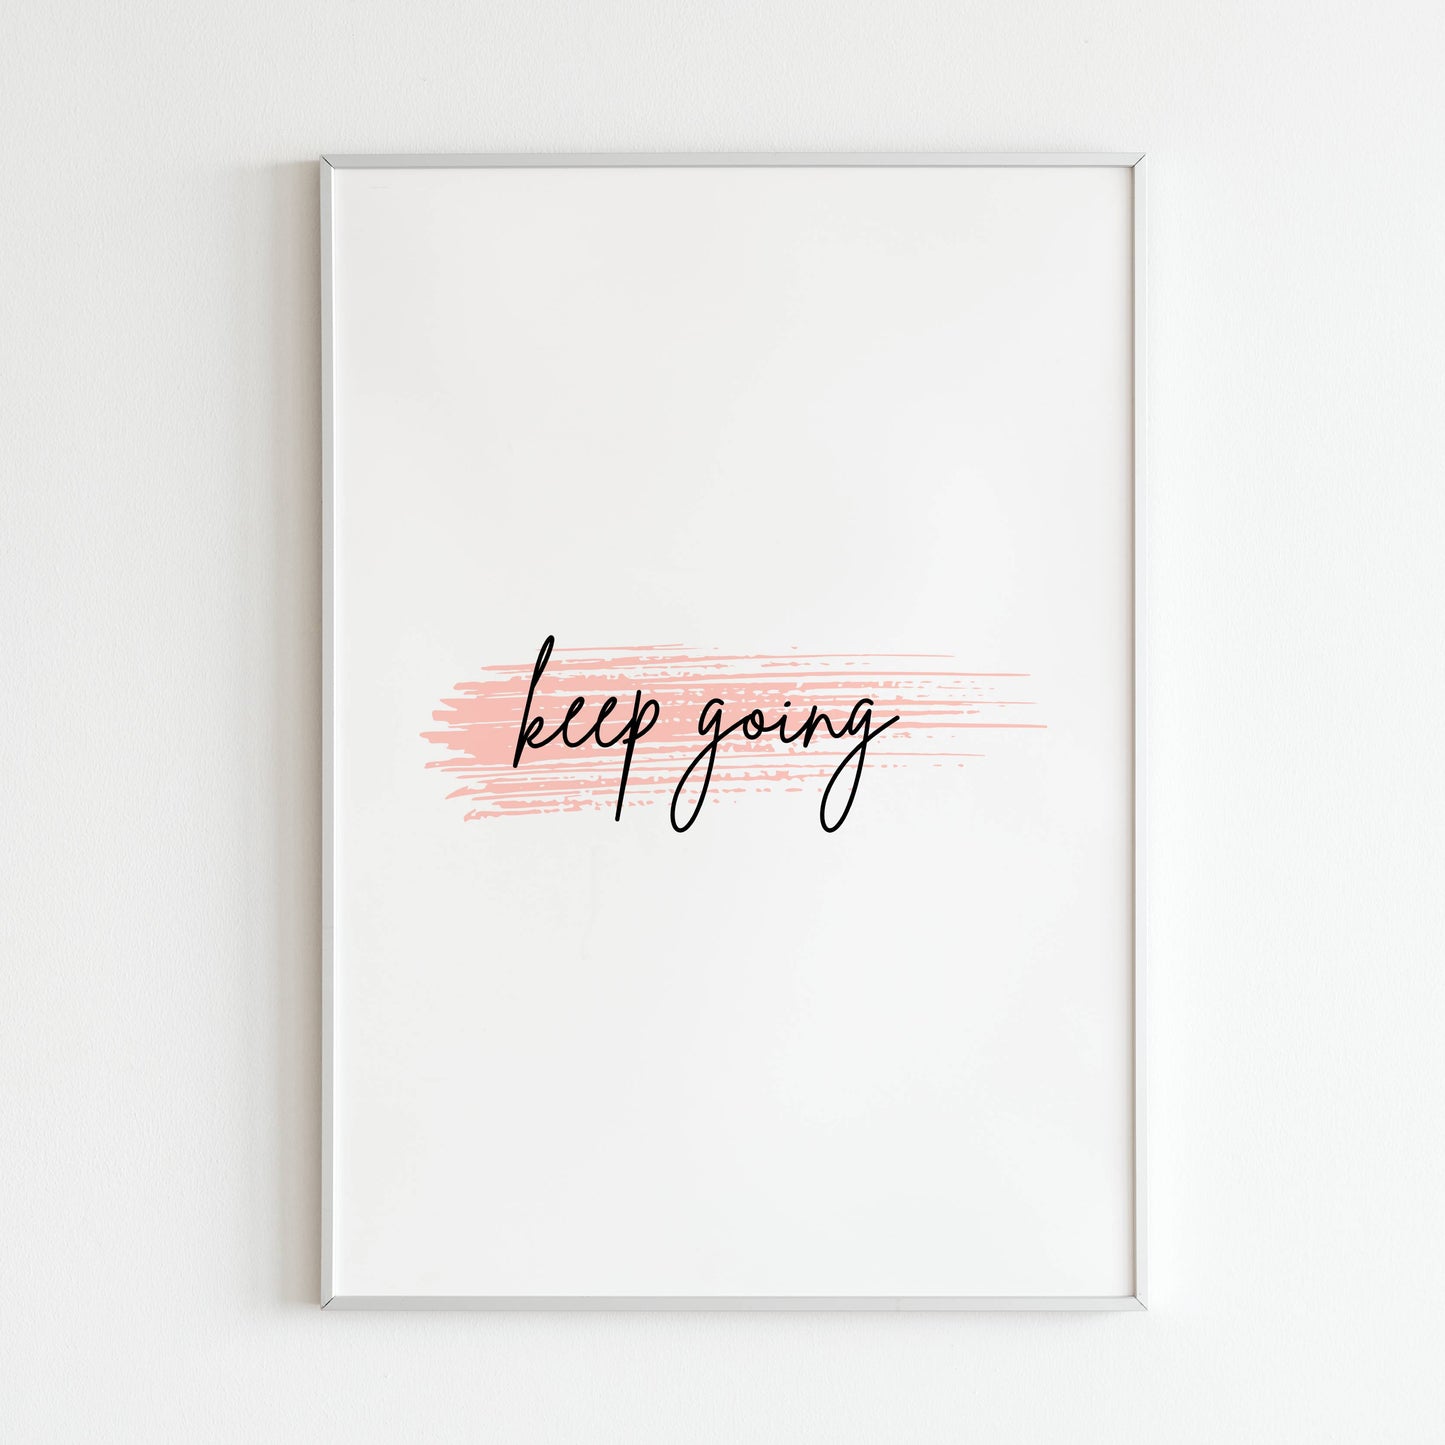 Downloadable "Keep going" wall art for a message of perseverance.